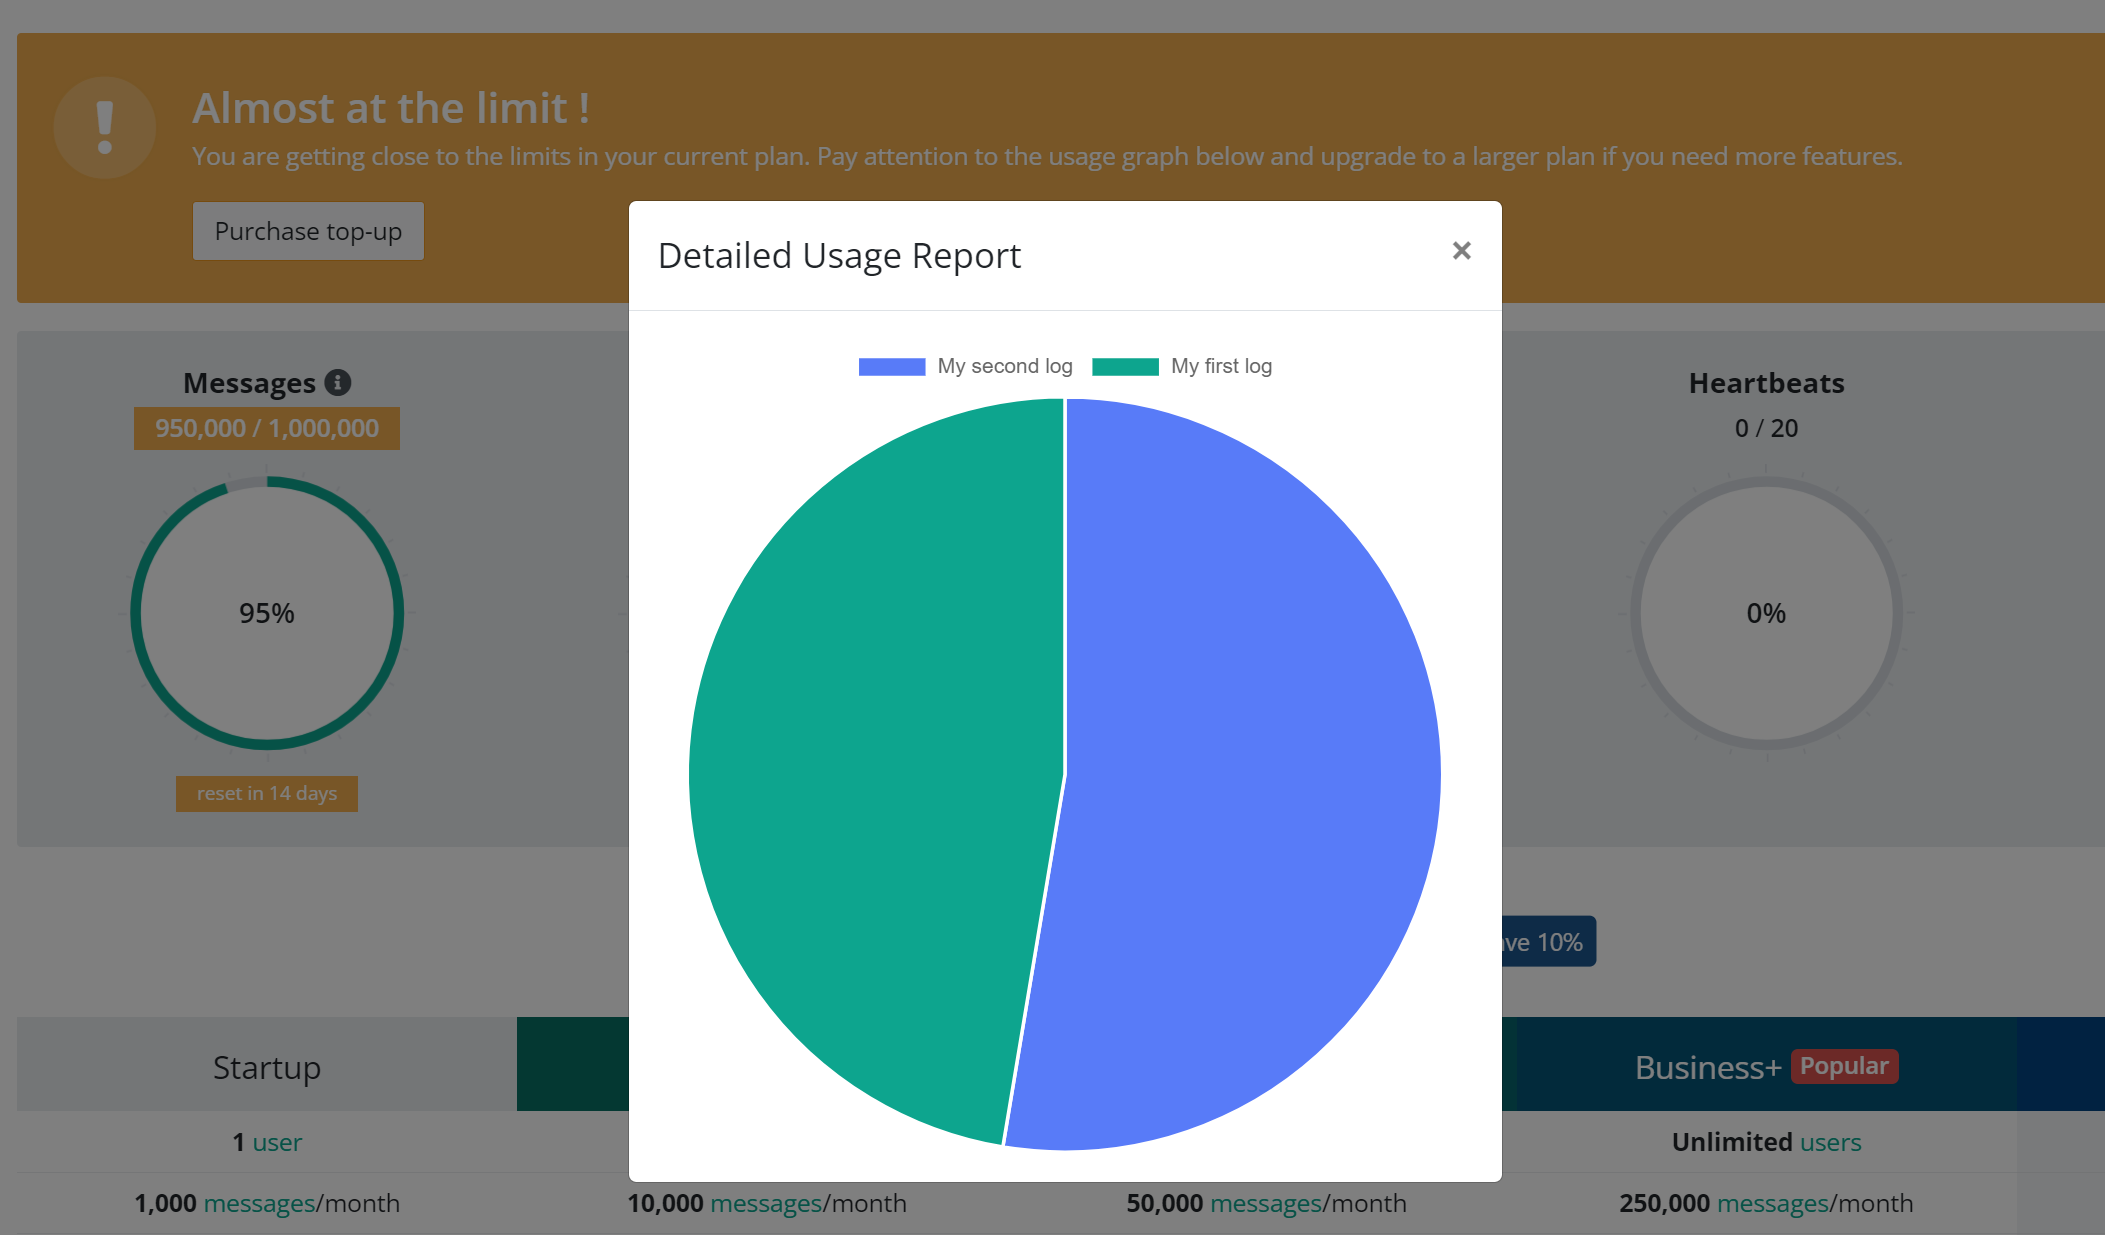 Detailed Usage Report